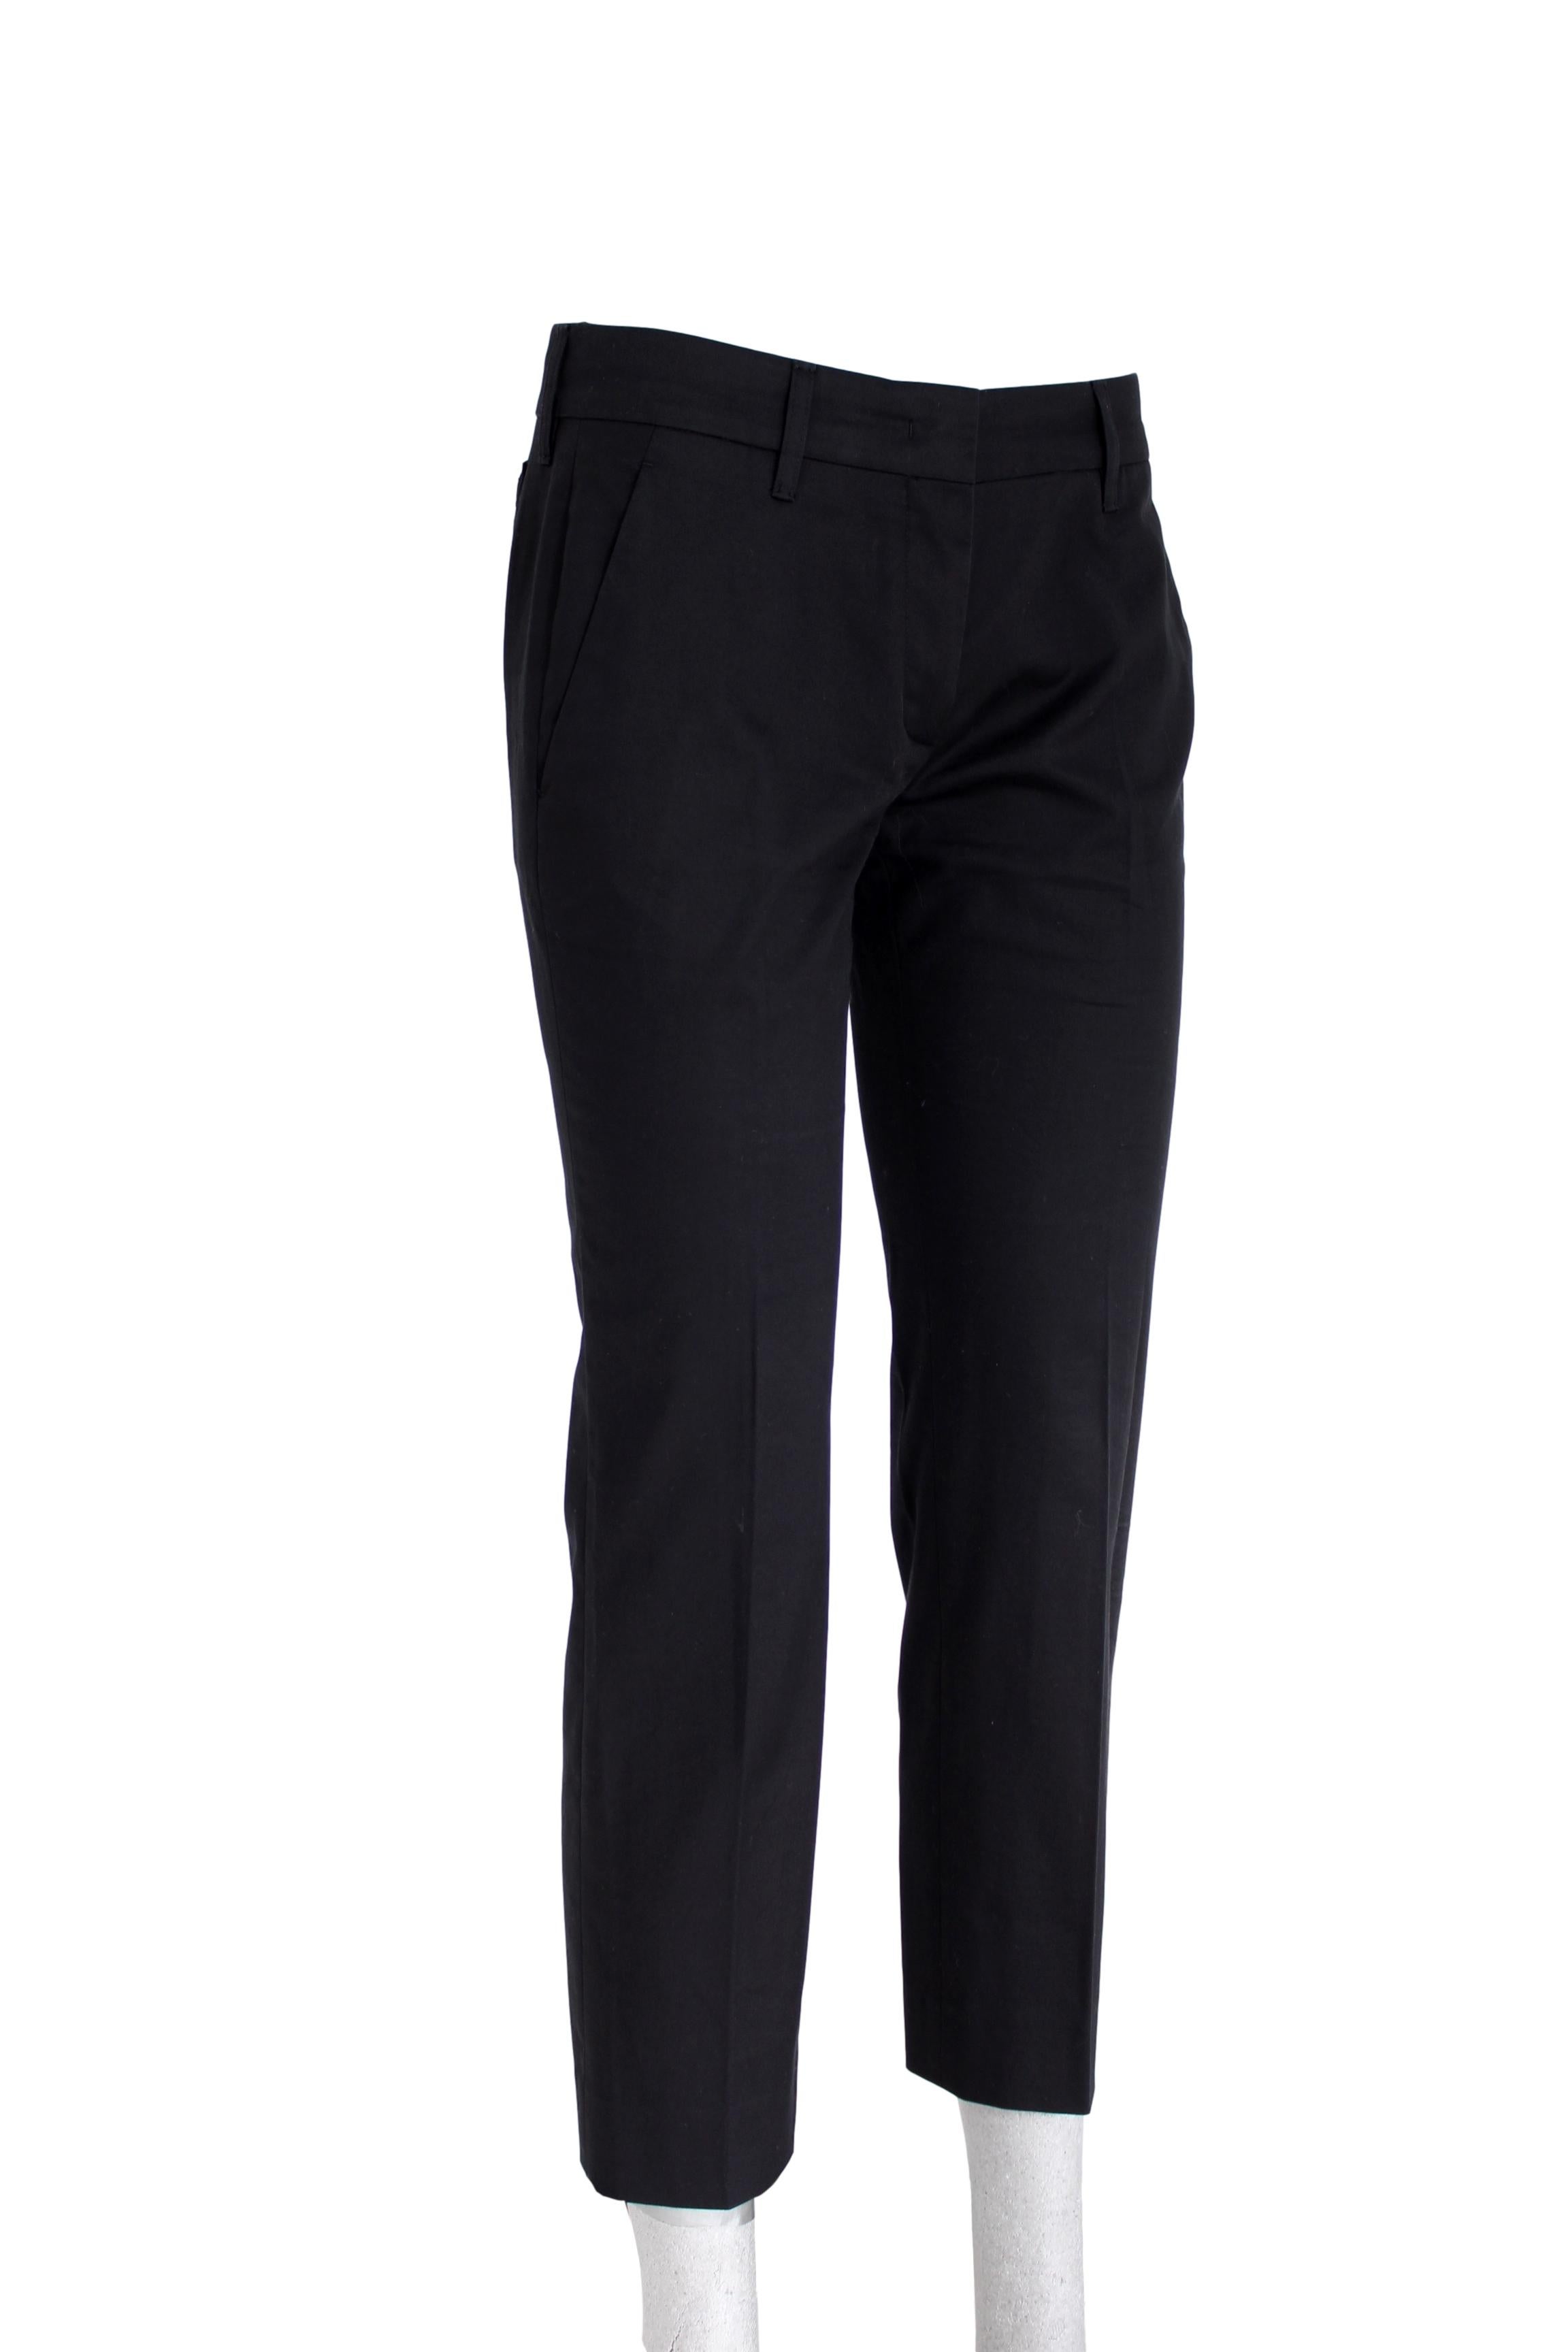 Prada 2000s women's trousers. Capri model trousers, short at the ankles, straight leg. Black color, 97% cotton 3% other fibers. Two pockets on the hips. Zip and clip closure. Made in Italy. Excellent vintage condition.

Size: 38 It 4 Us 6 Uk

Waist: